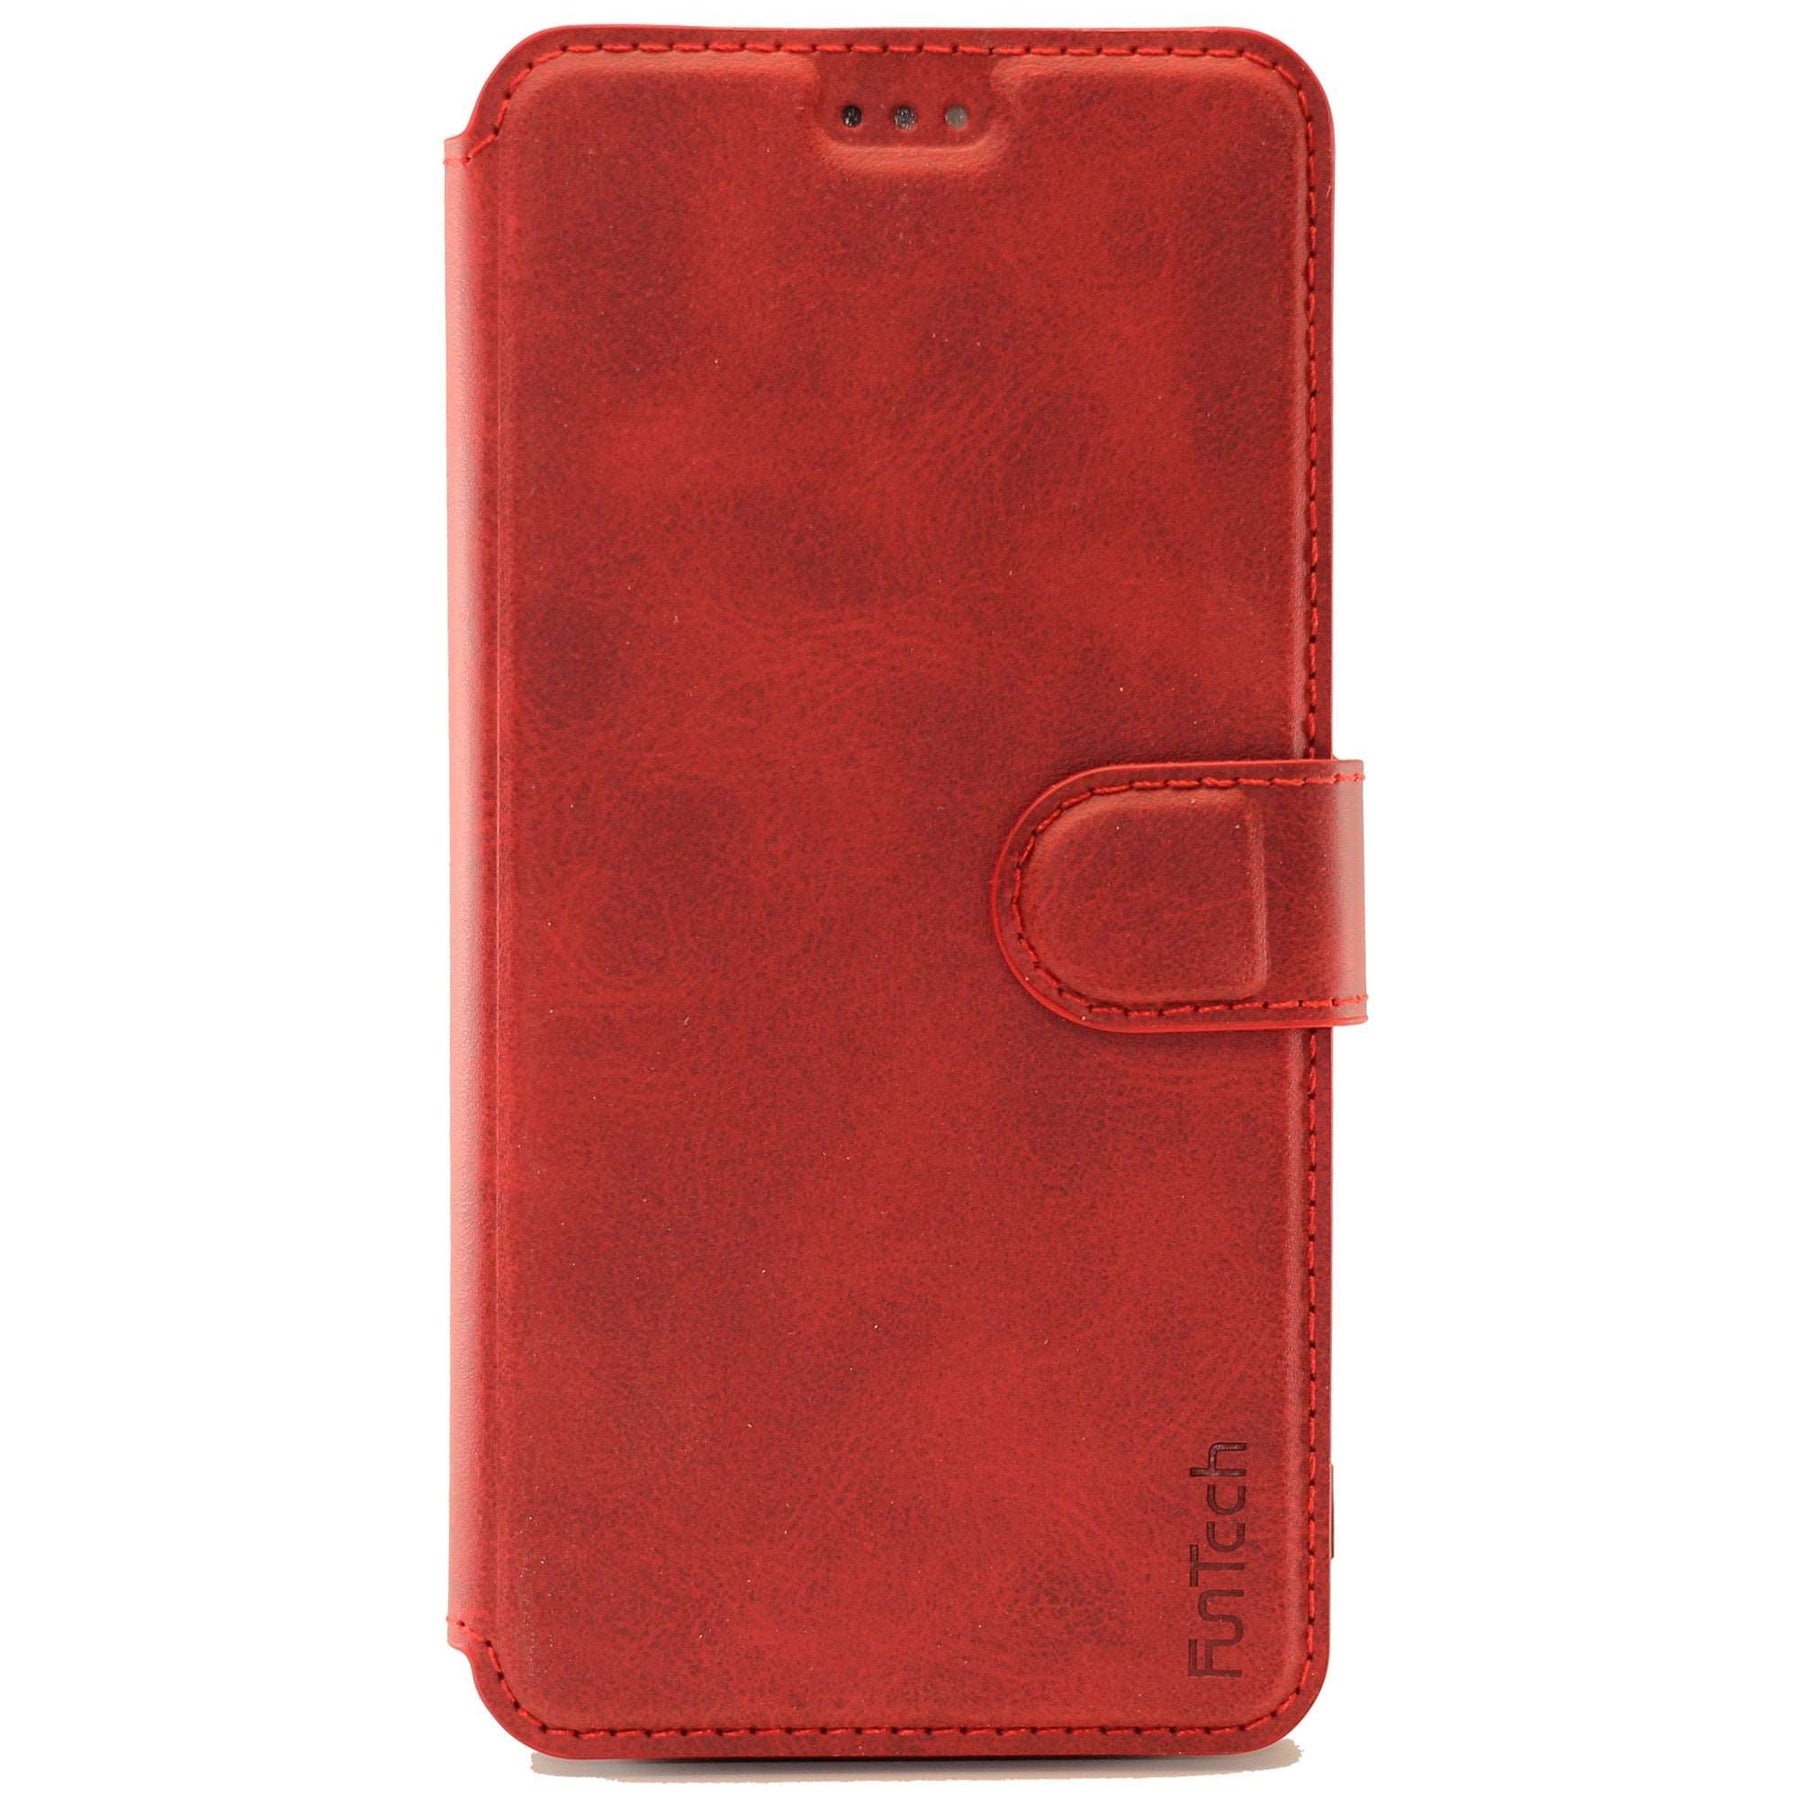 Apple iPhone 11 Pro MAX Leather Wallet Case Color Red